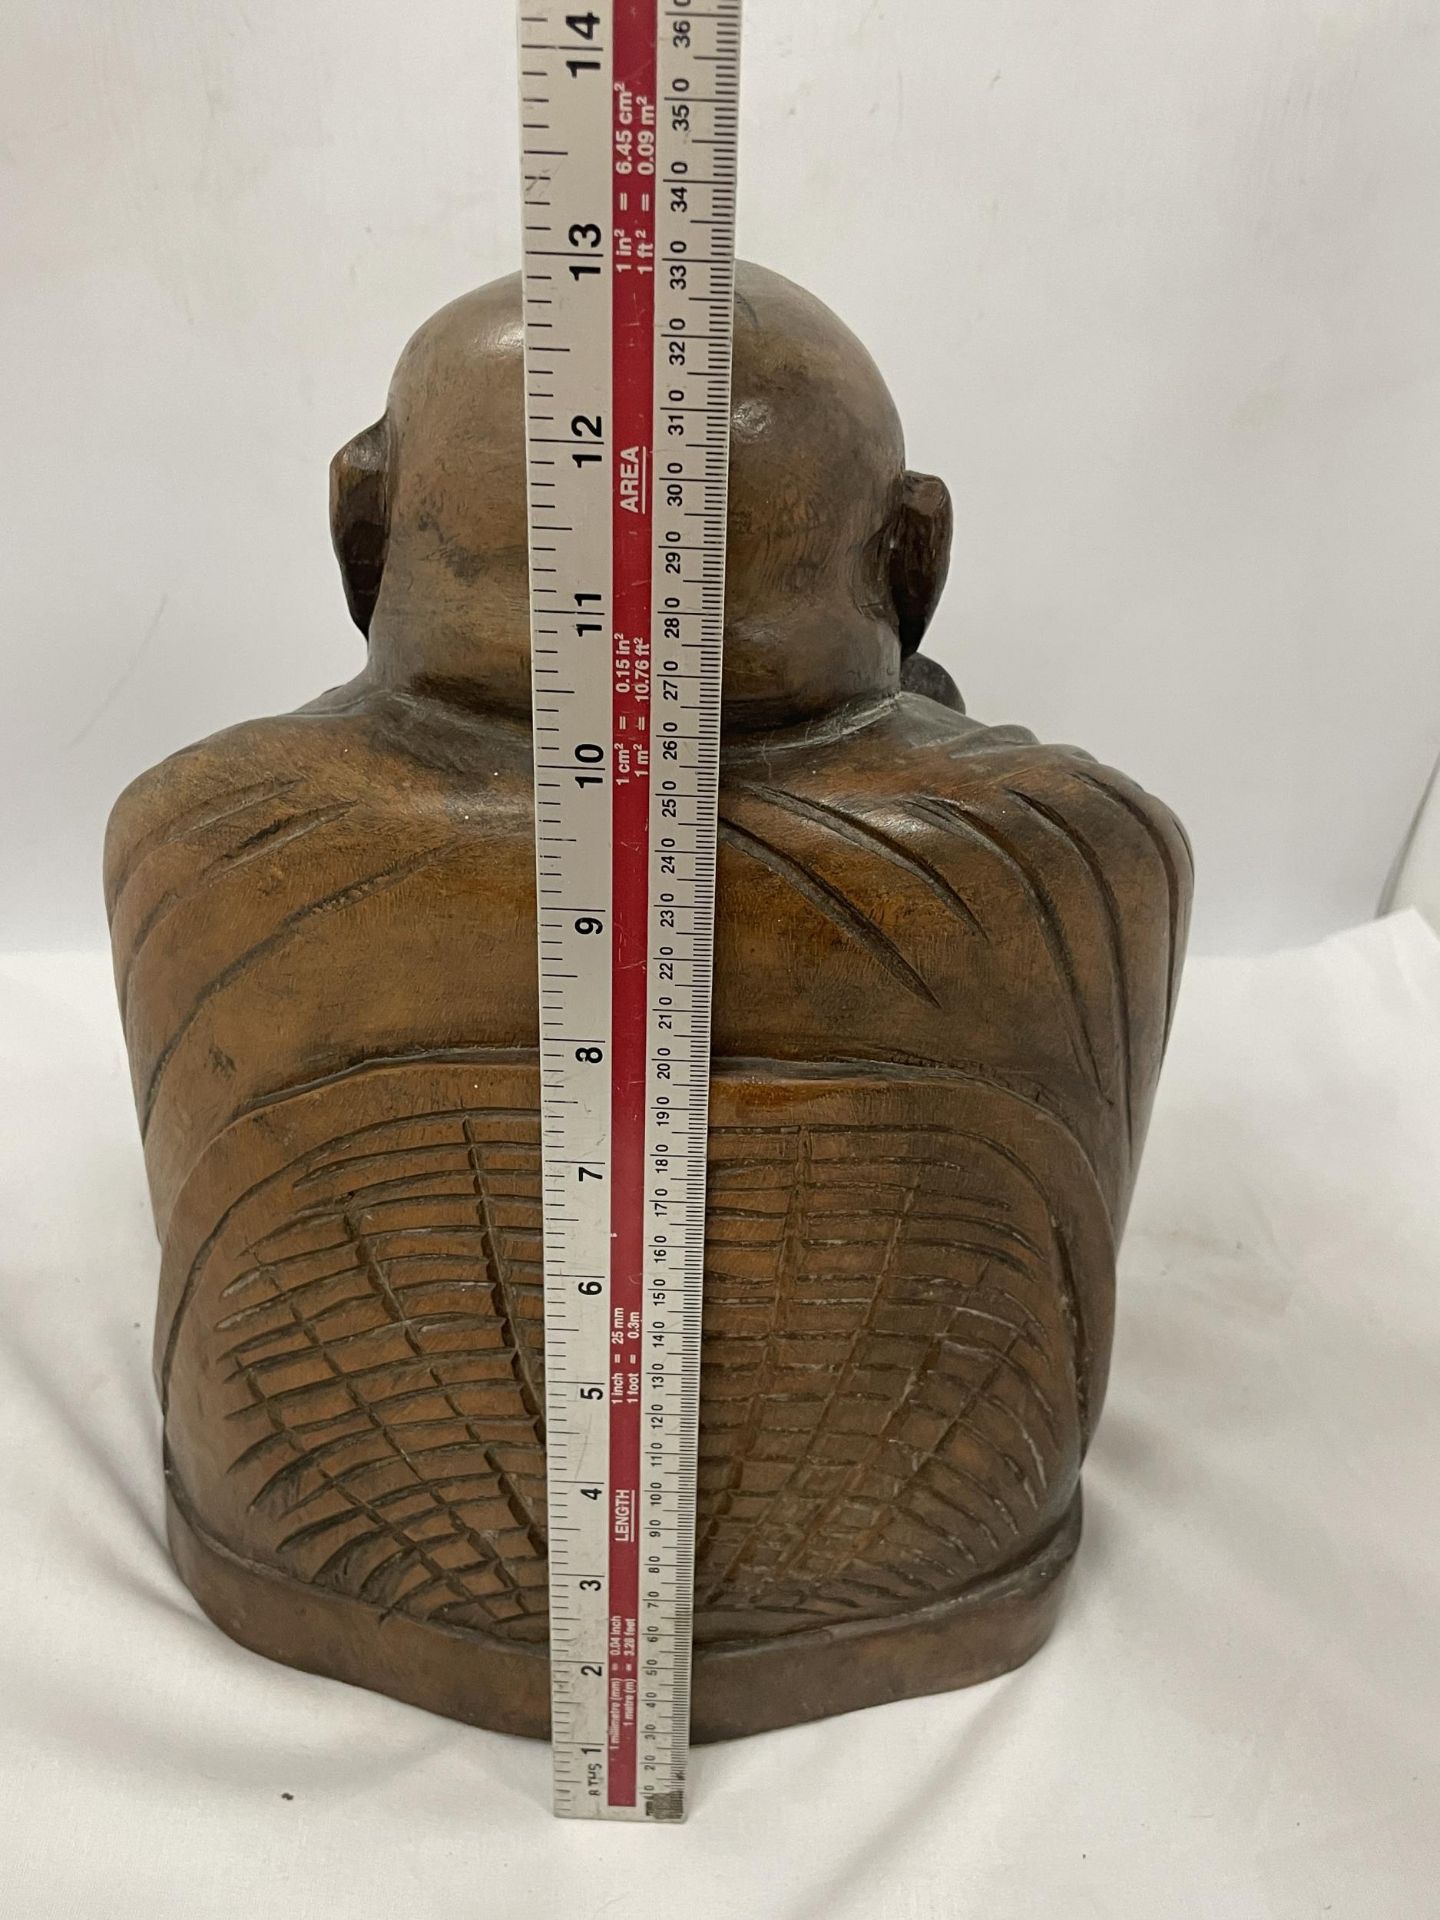 A LARGE CARVED WOODEN BUDDHA FIGURE 13" TALL - Image 4 of 4